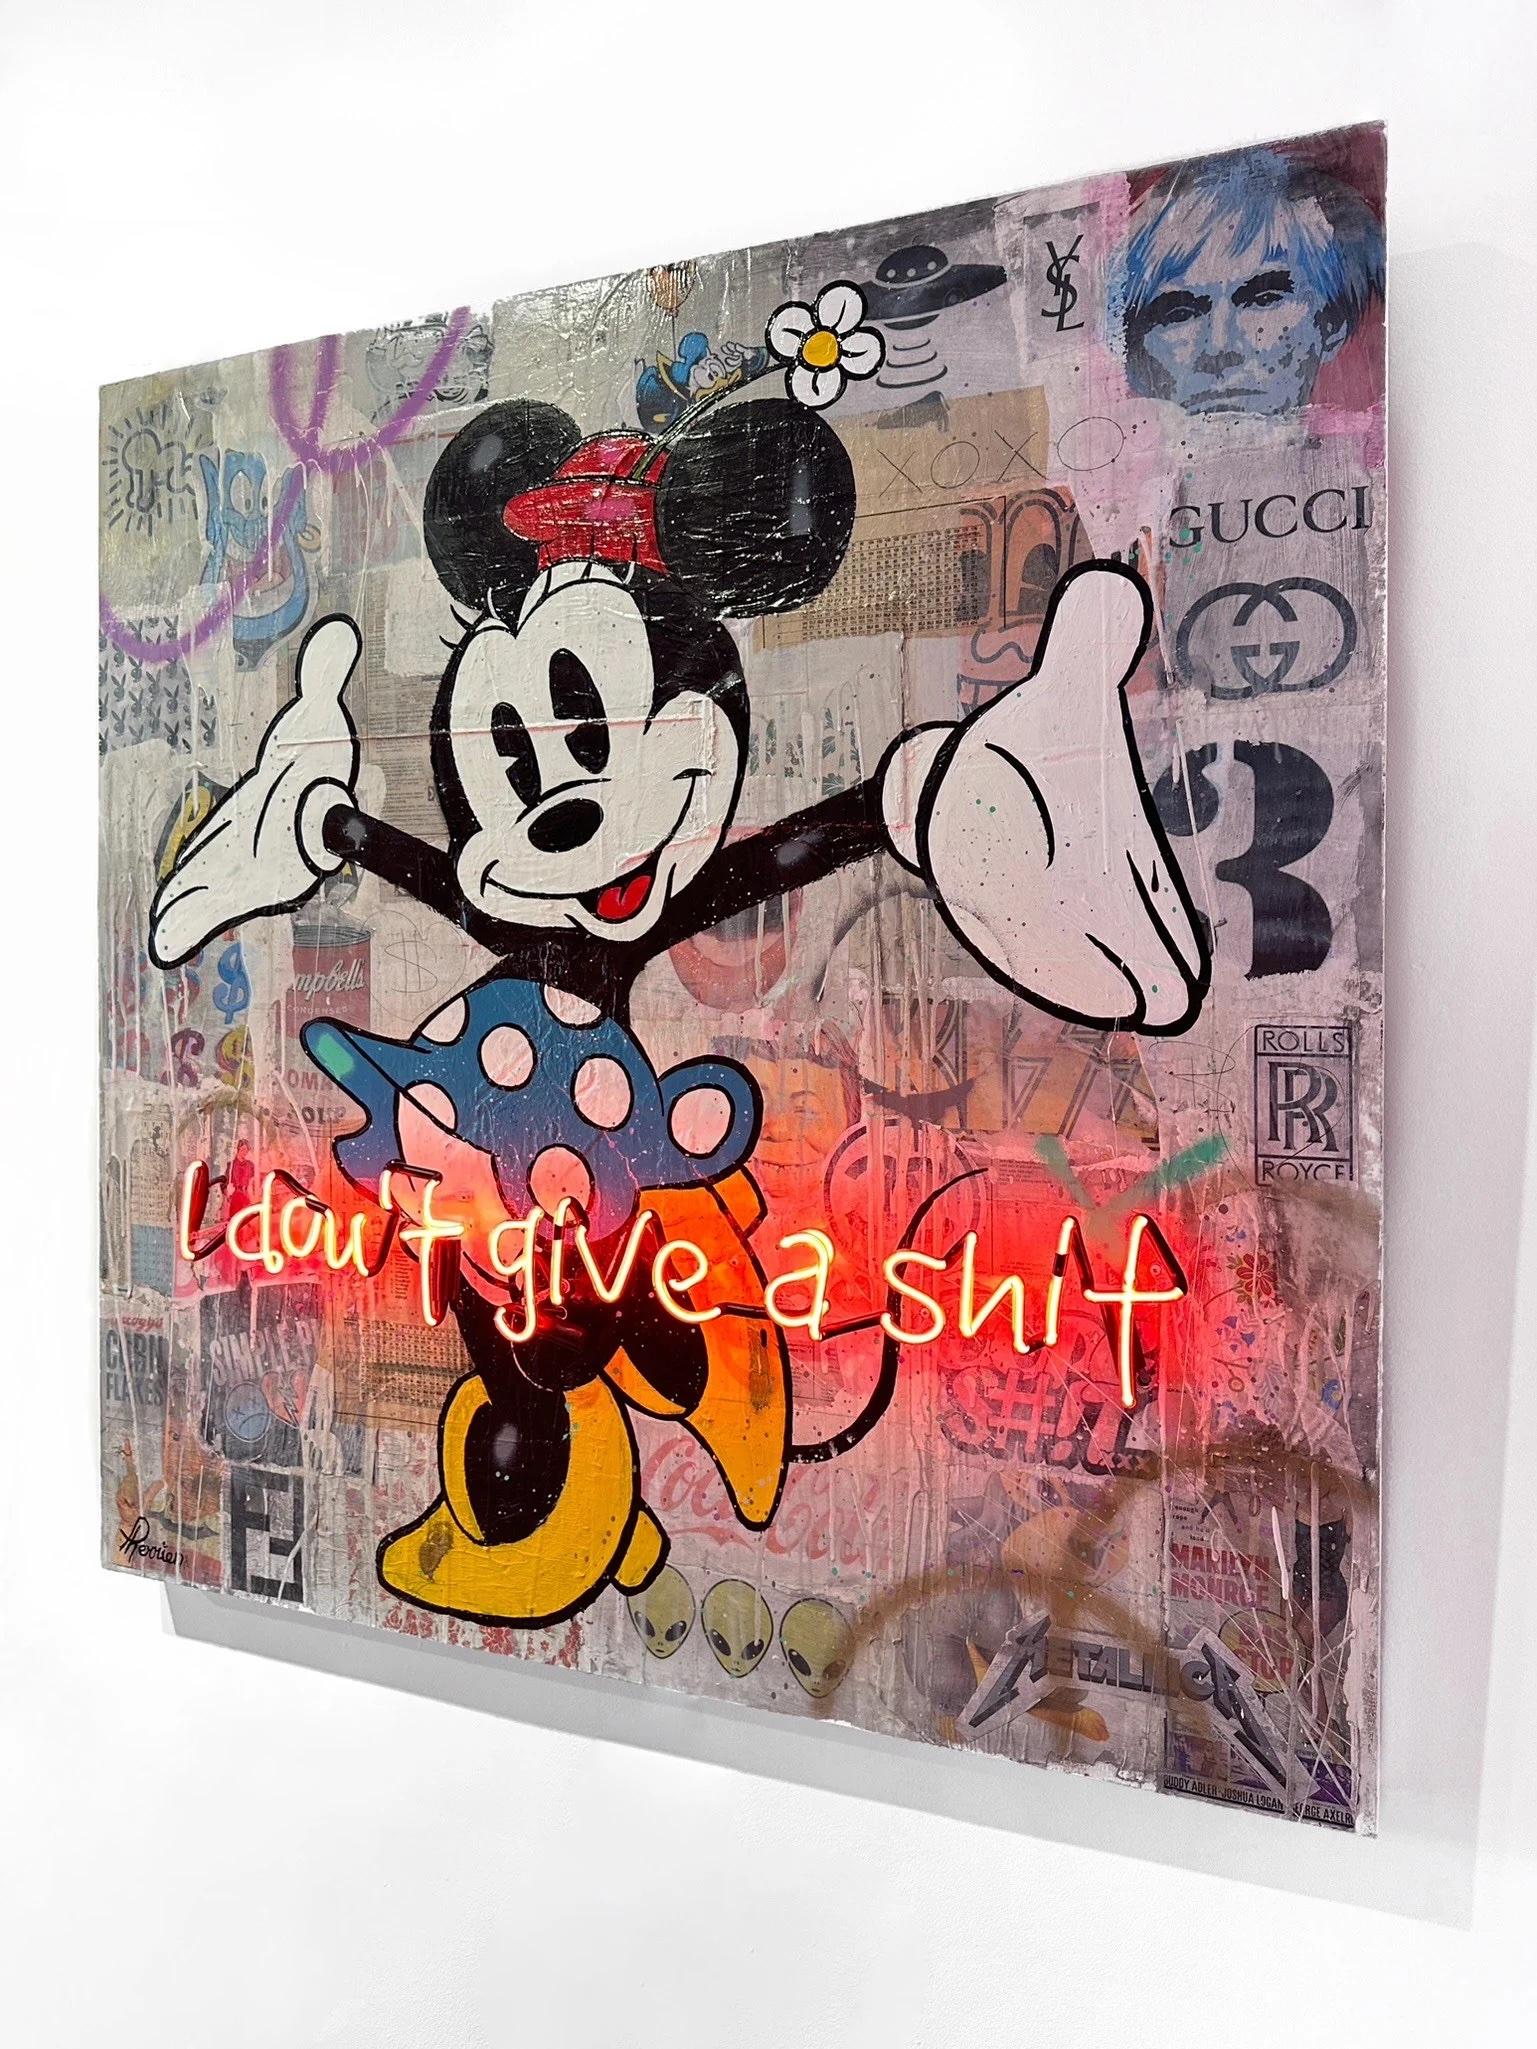 I Don't Give A Shit - Mixed Media Art by Rock Therrien